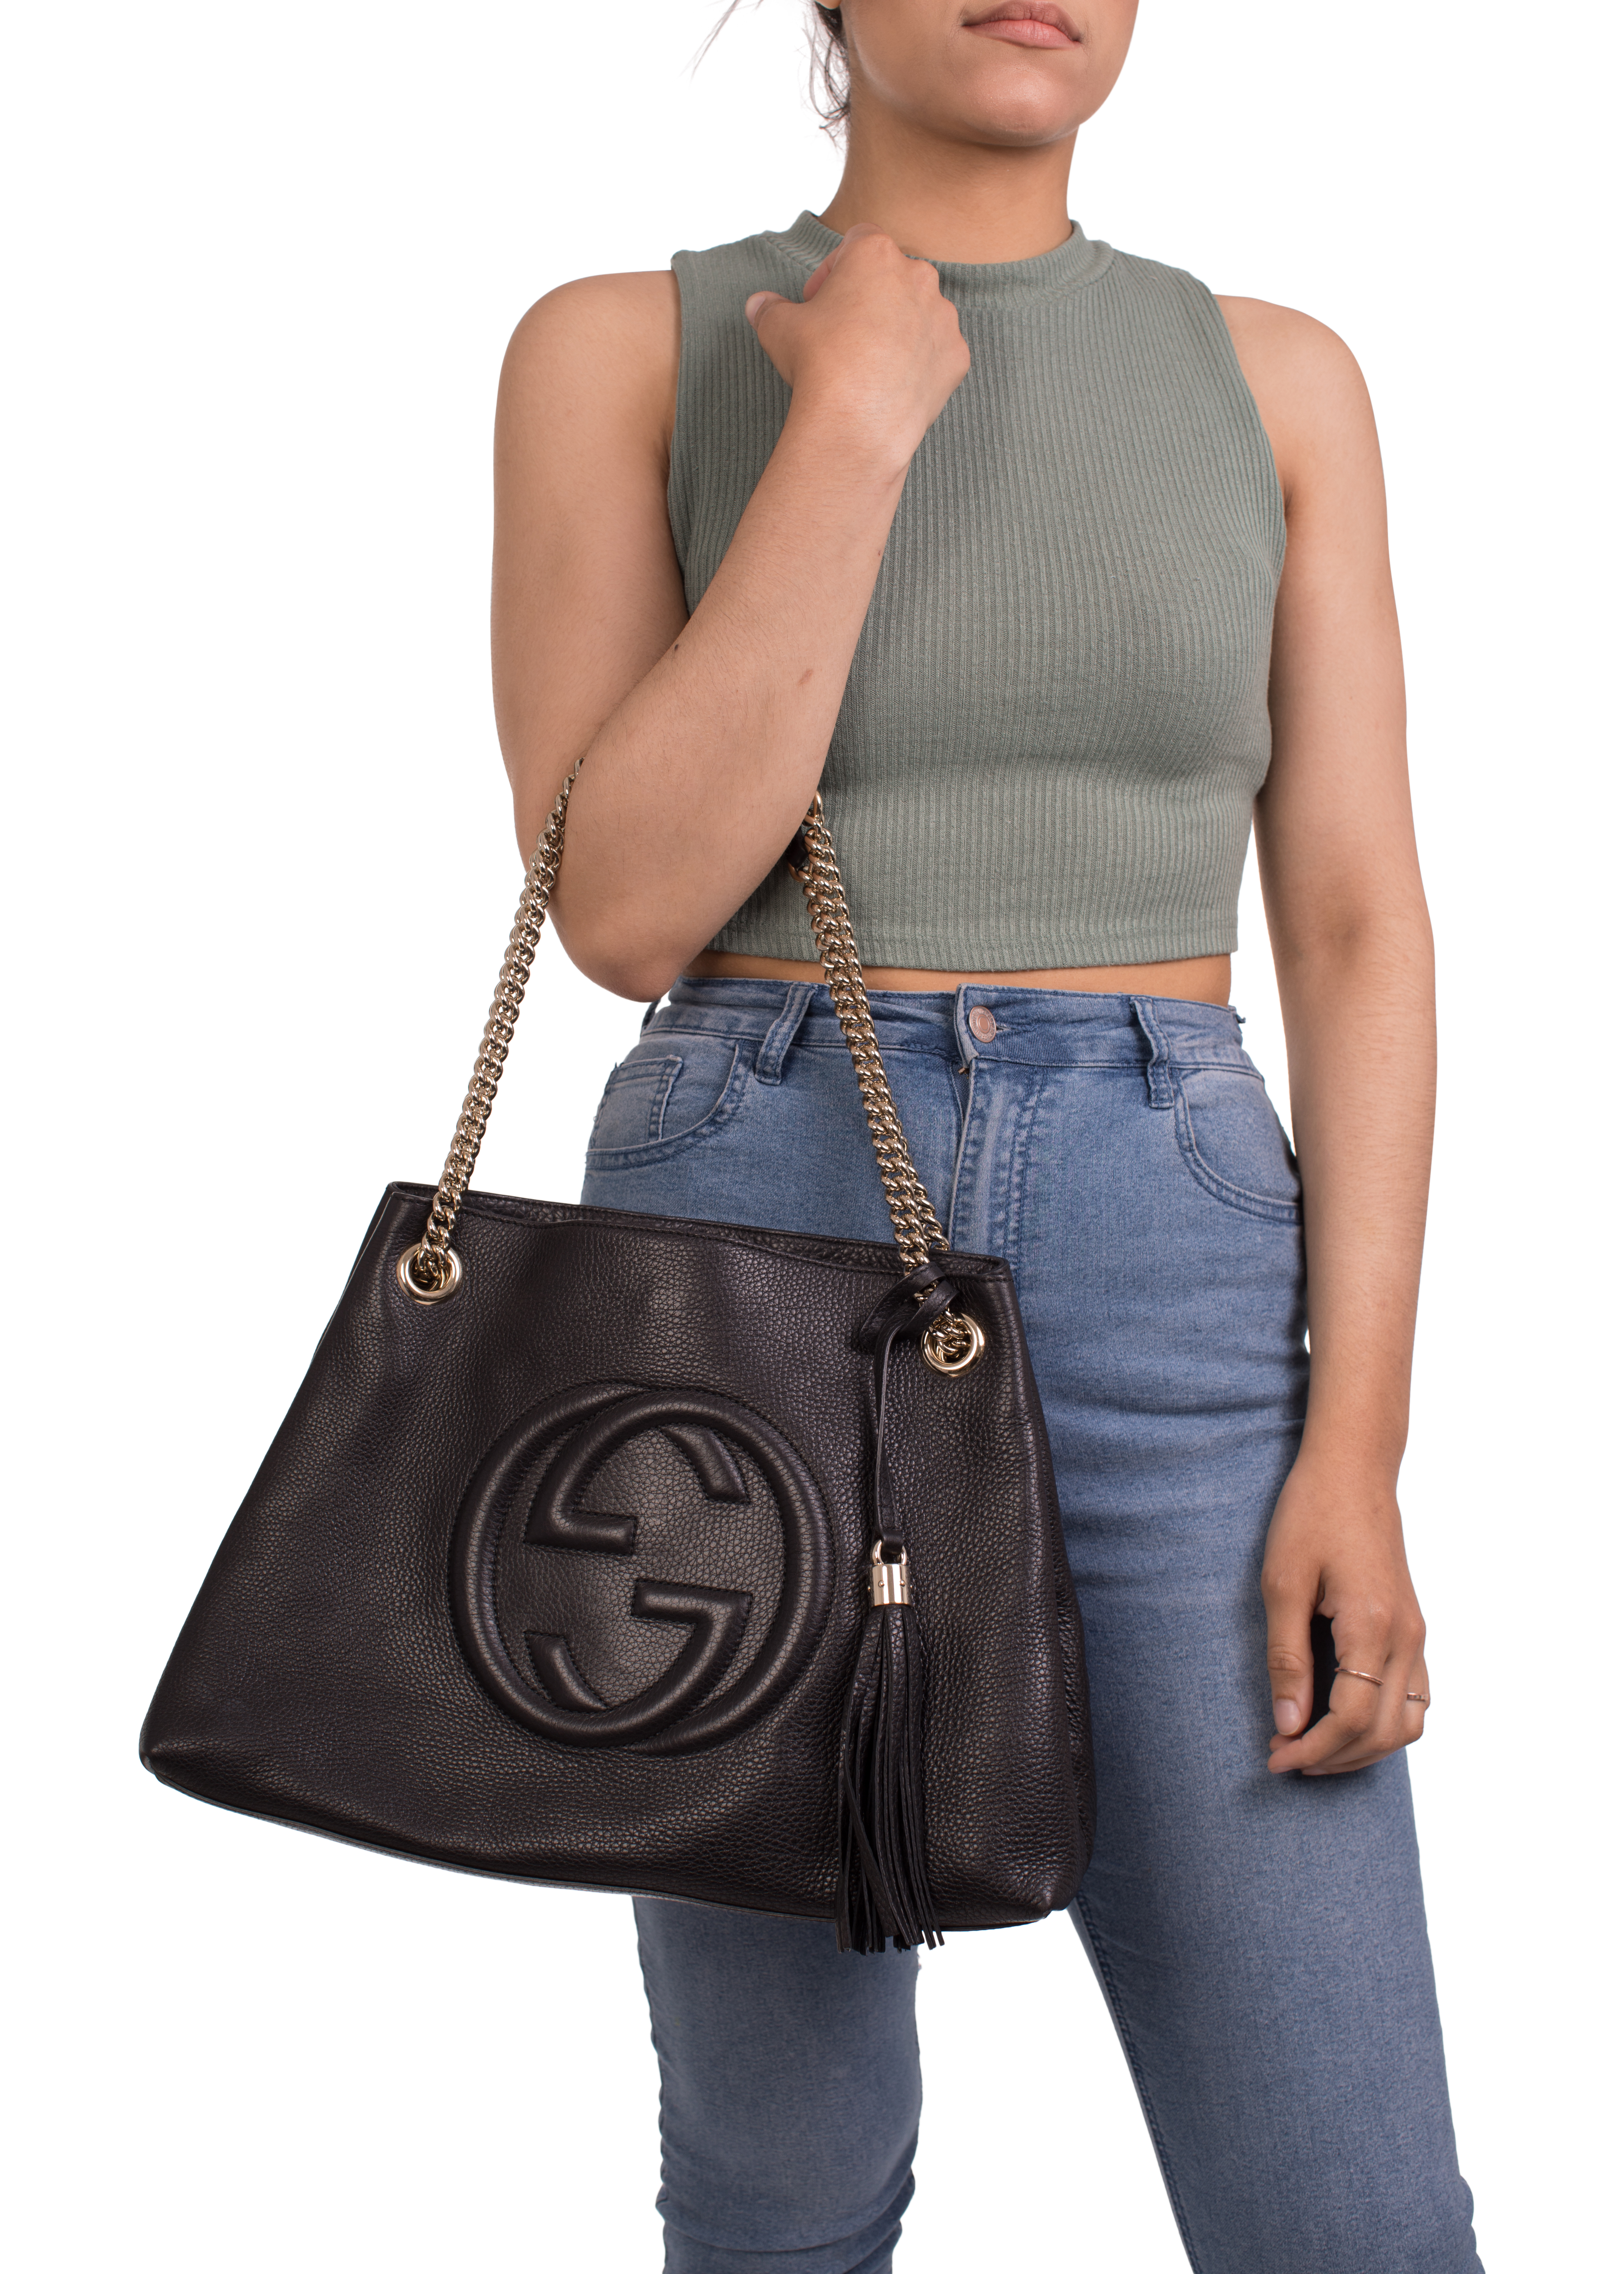 gucci soho black leather shoulder bag with chain strap